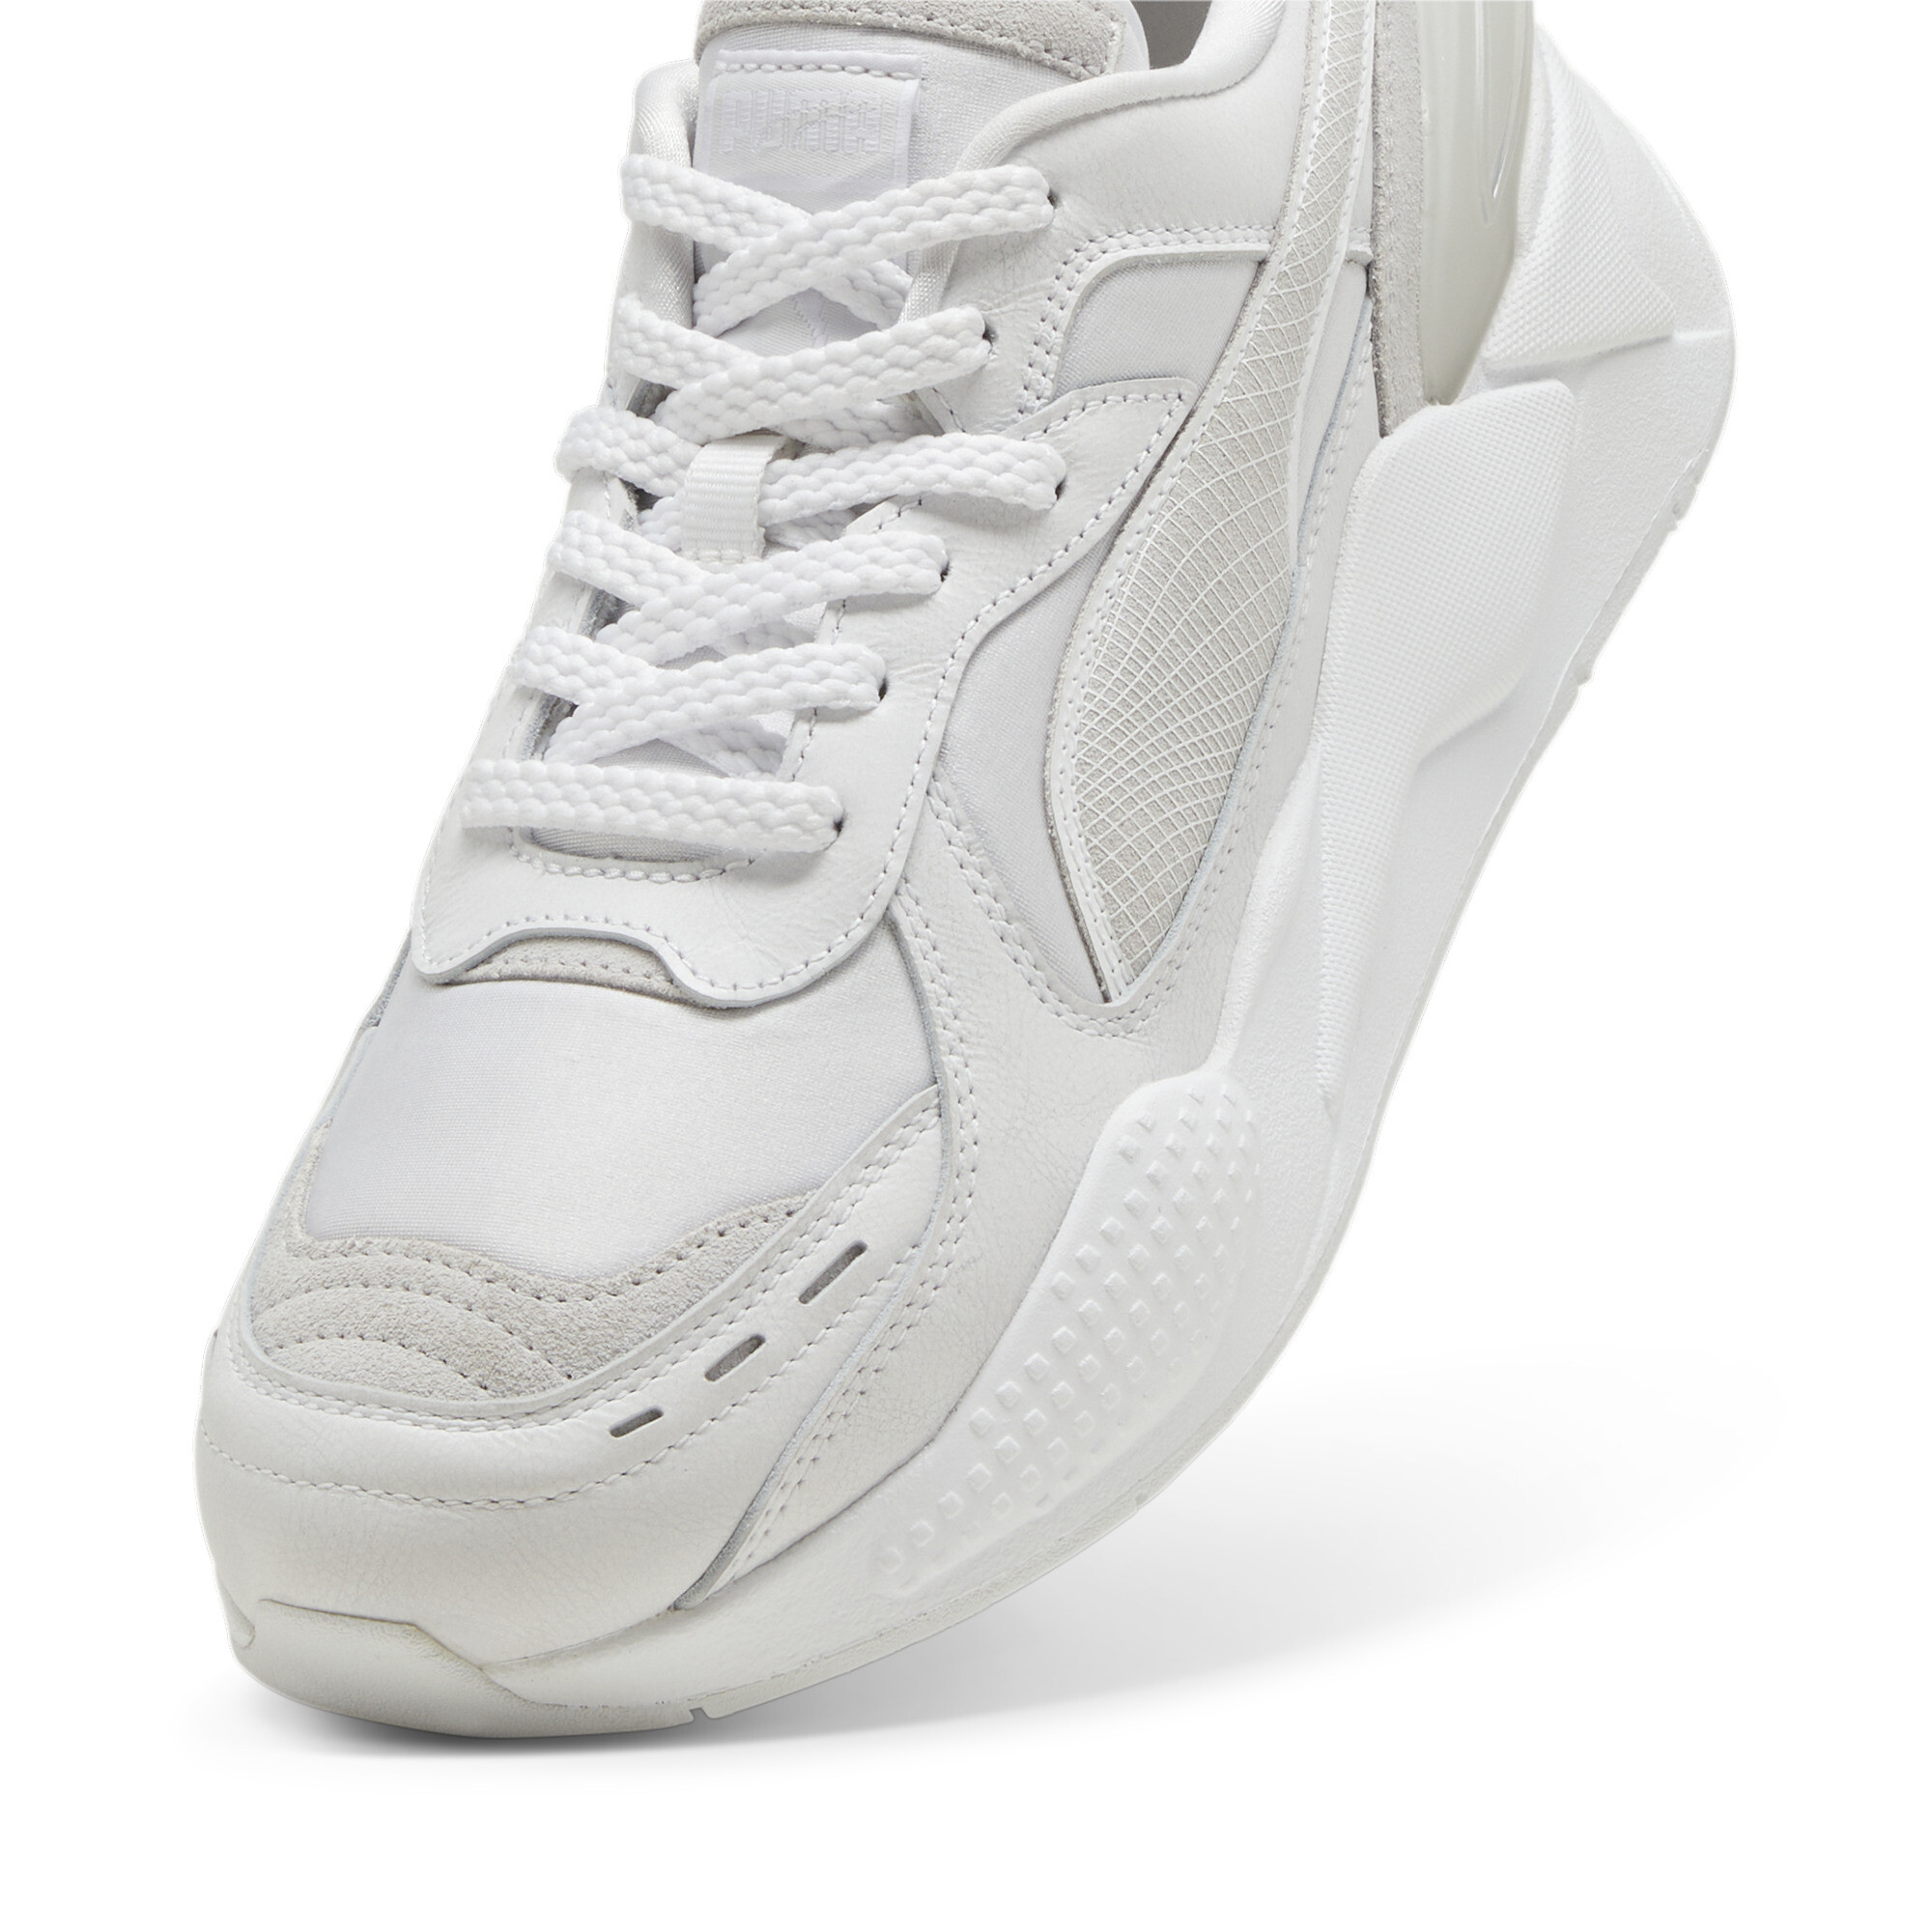 Puma RS-X 40th Anniversary Sneakers, White, Size 37.5, Shoes